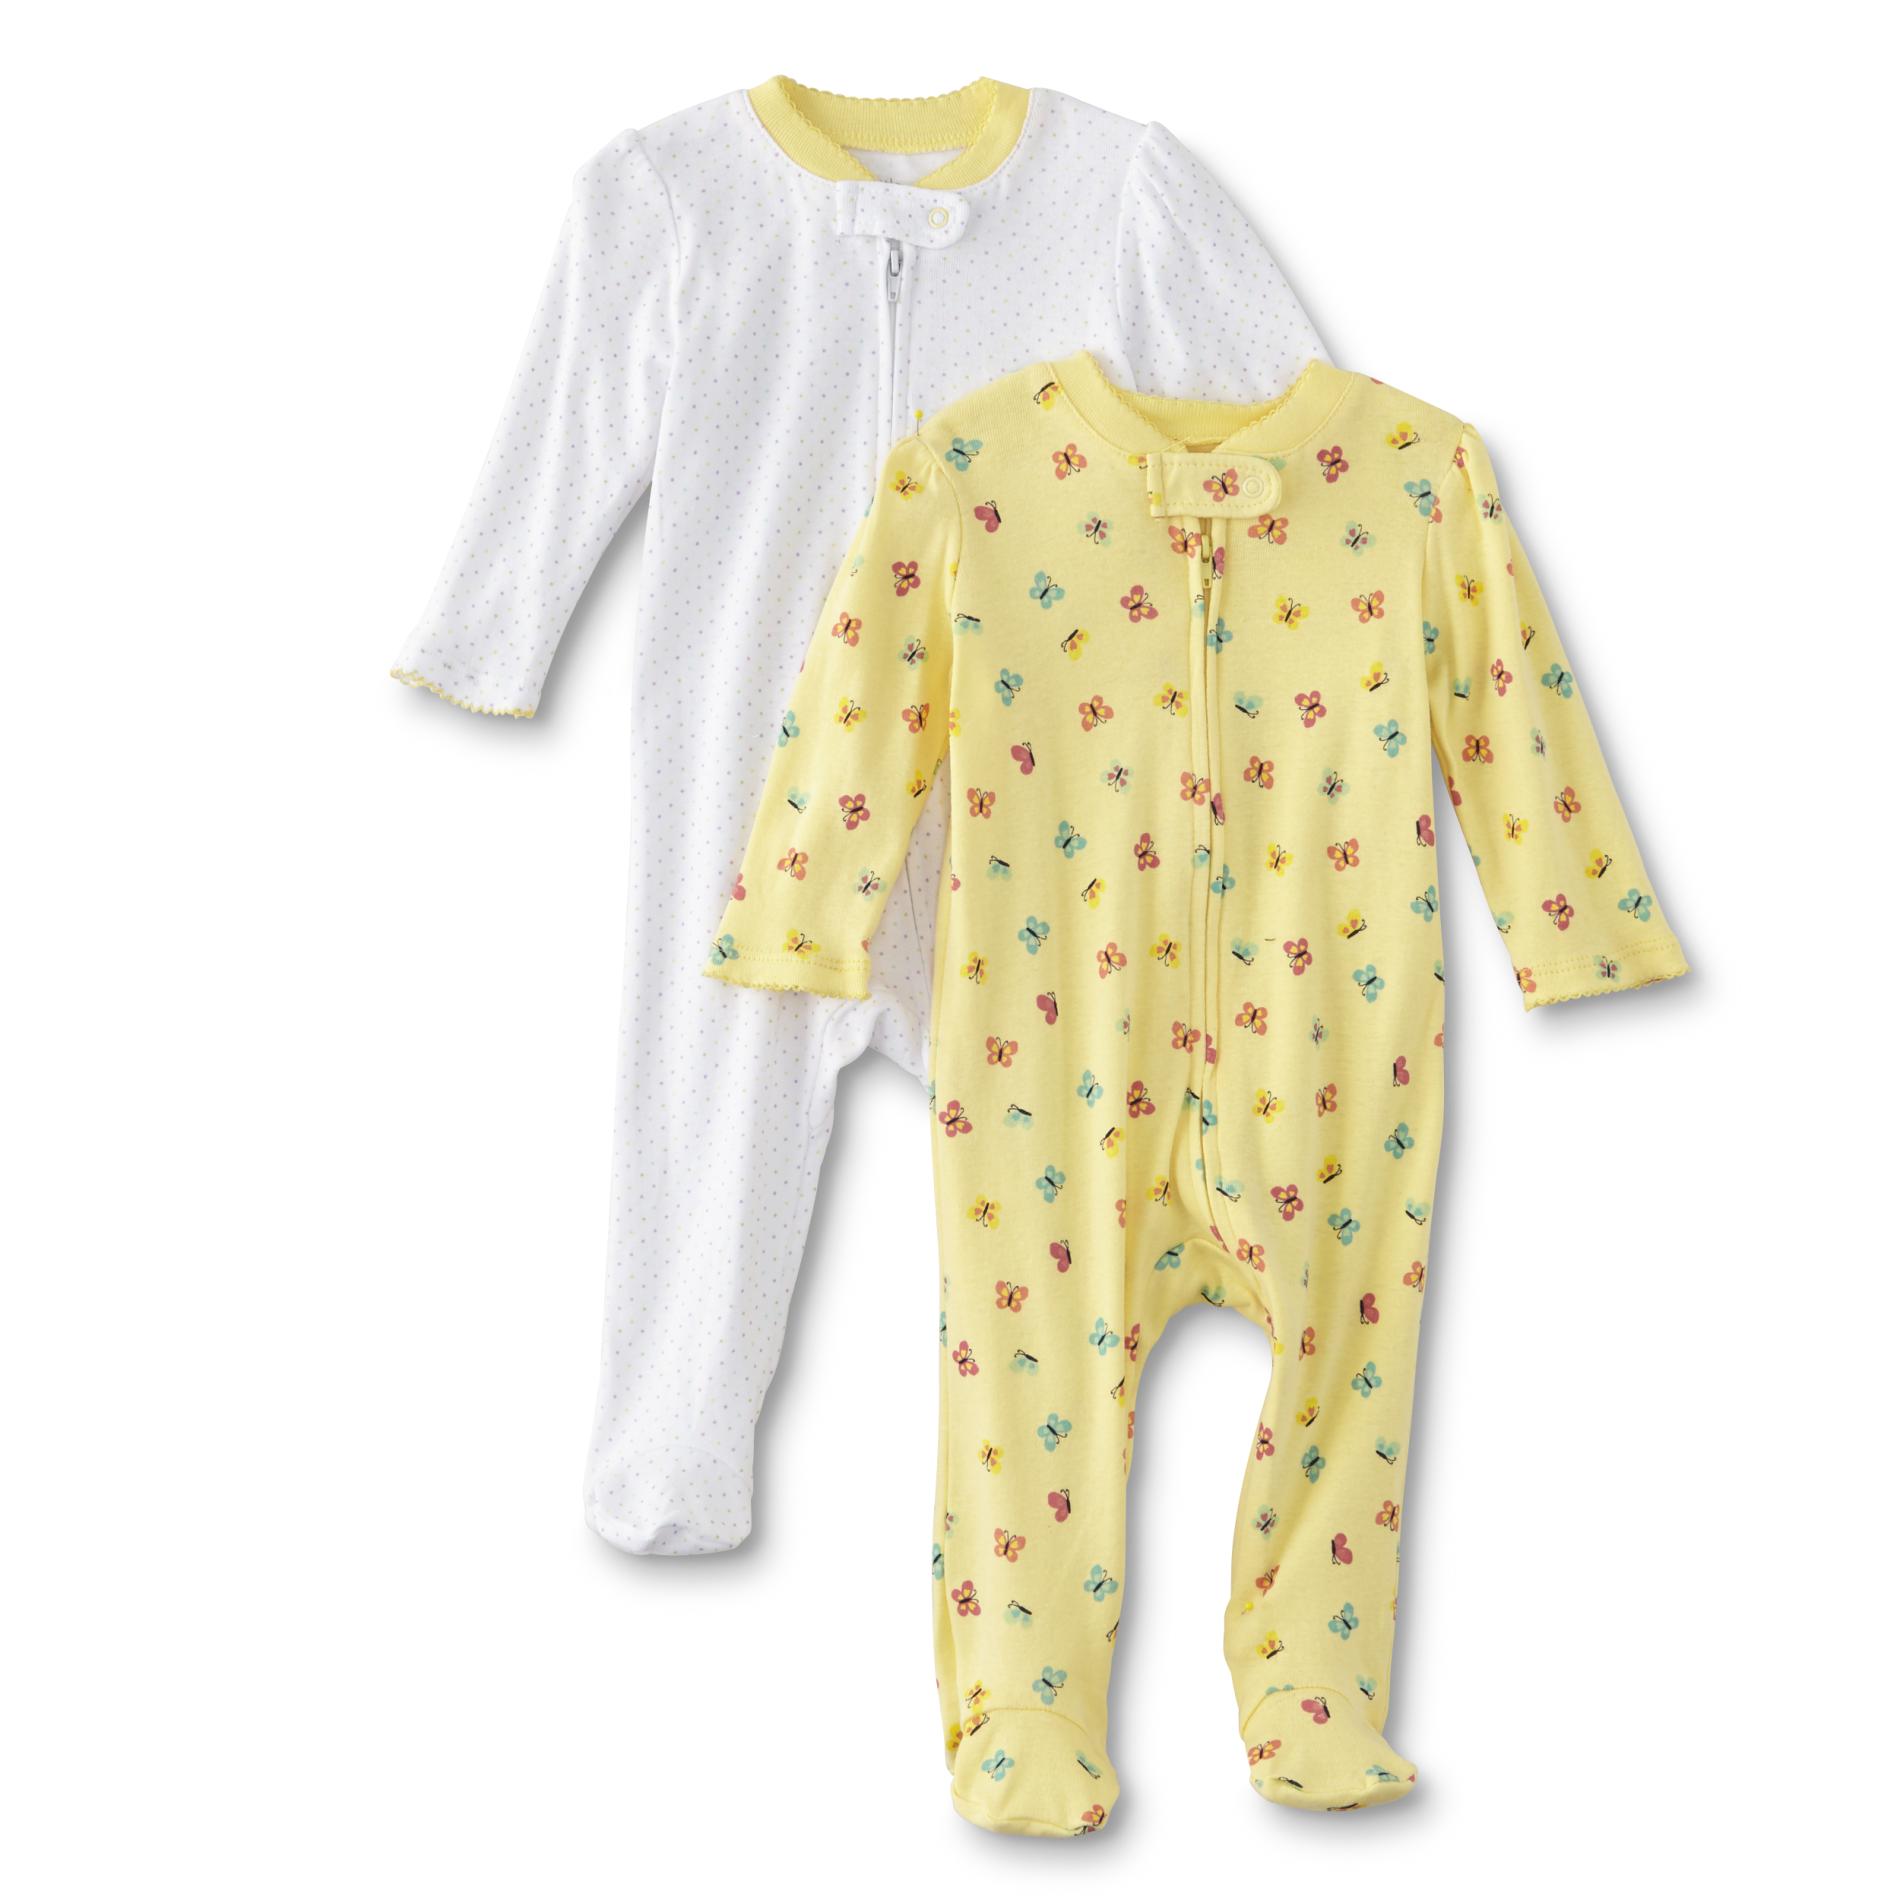 Little Wonders Infant Girls' 2-Pack Footed Pajamas - Butterflies & Dots